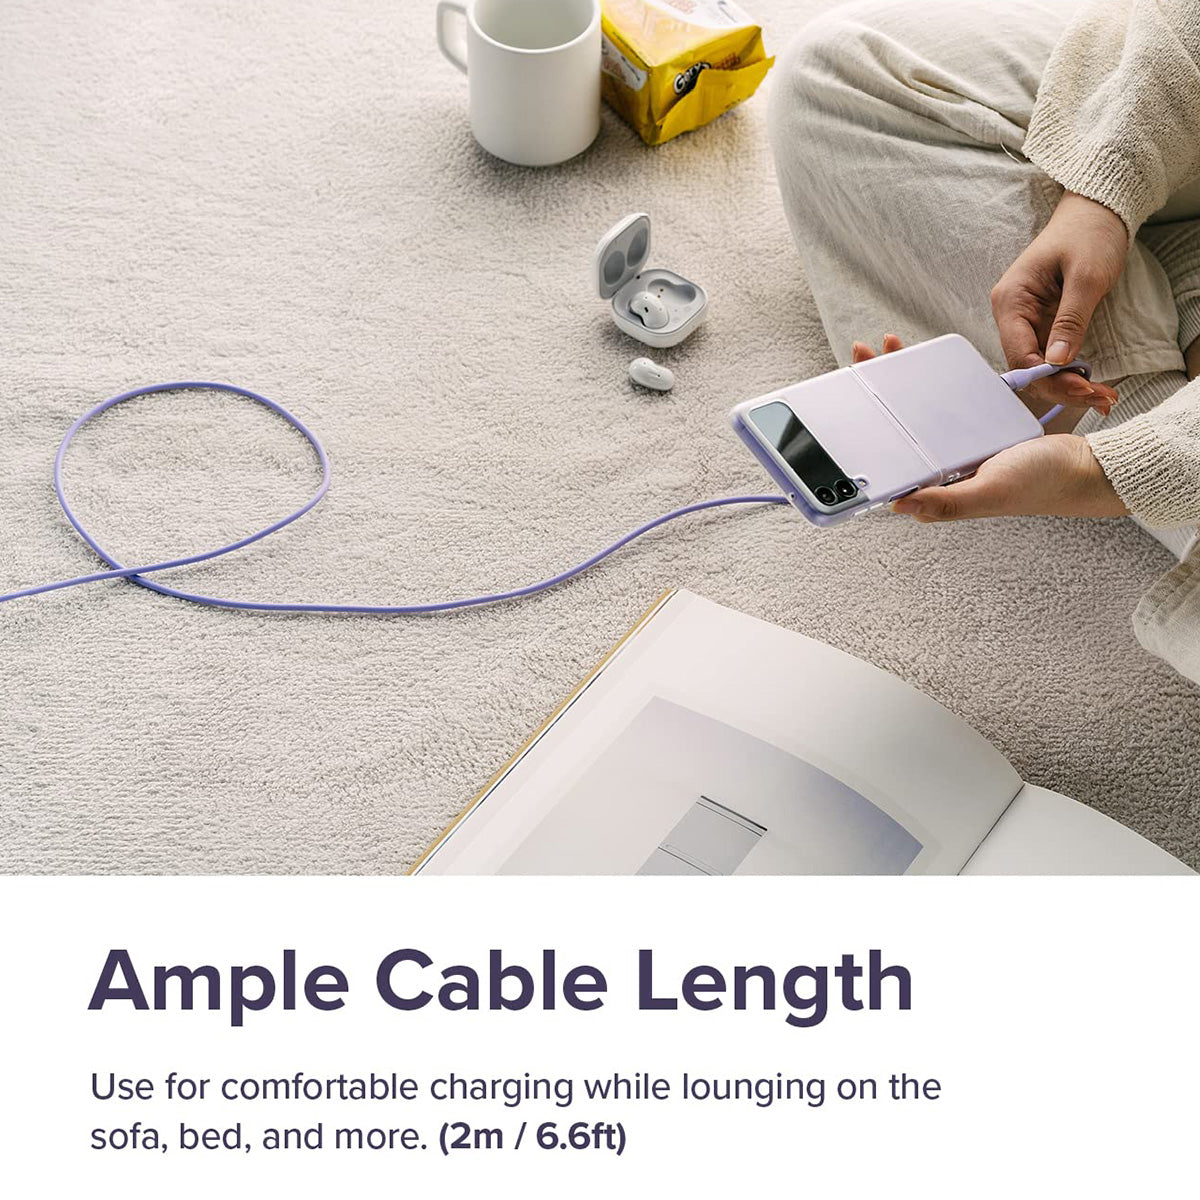 Ringke USB-C to Lighting Pastel Charging Cable (1.2m)